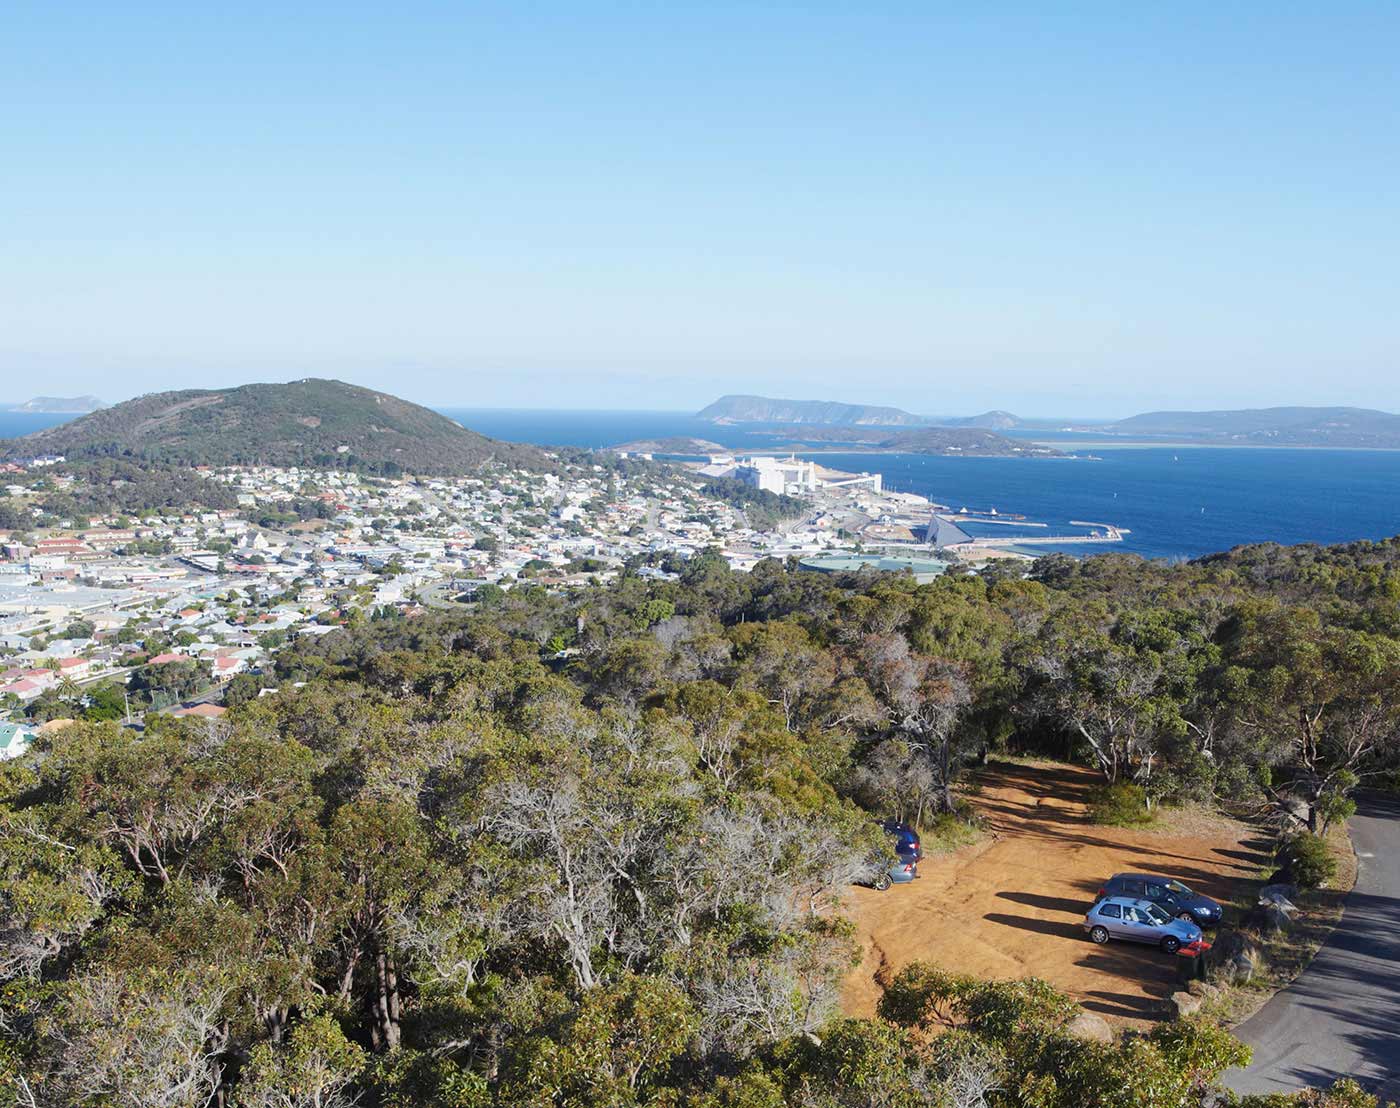 A photo looking down on a dirt carpark with three vehicles visible, surrounded by hundreds of trees. The sea, hills and town form the backdrop.